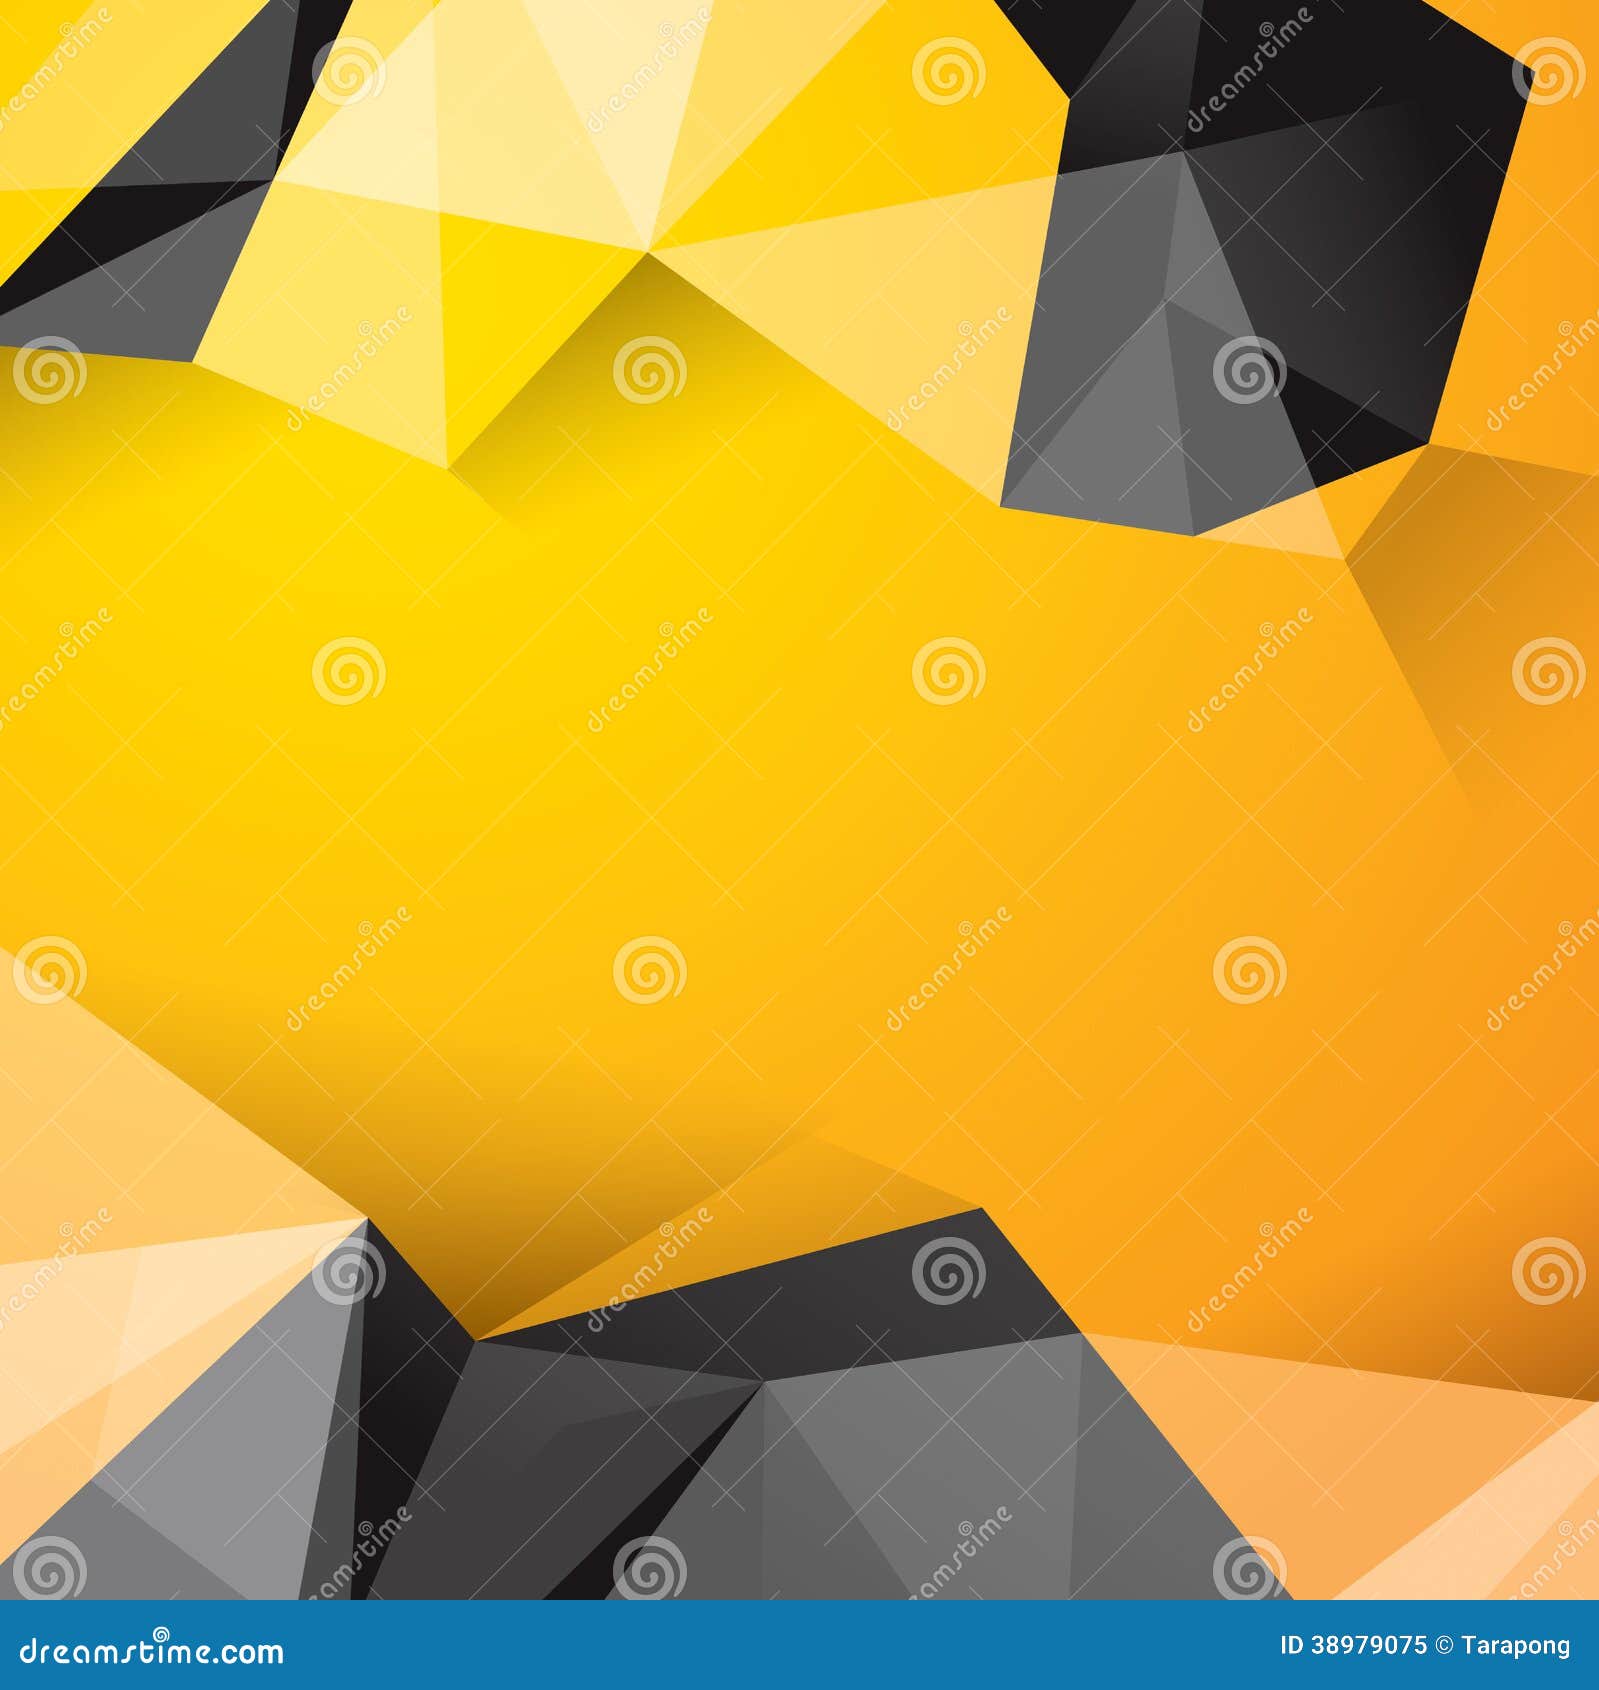 Yellow And Black Geometrical Background. Stock Vector - Image: 38979075